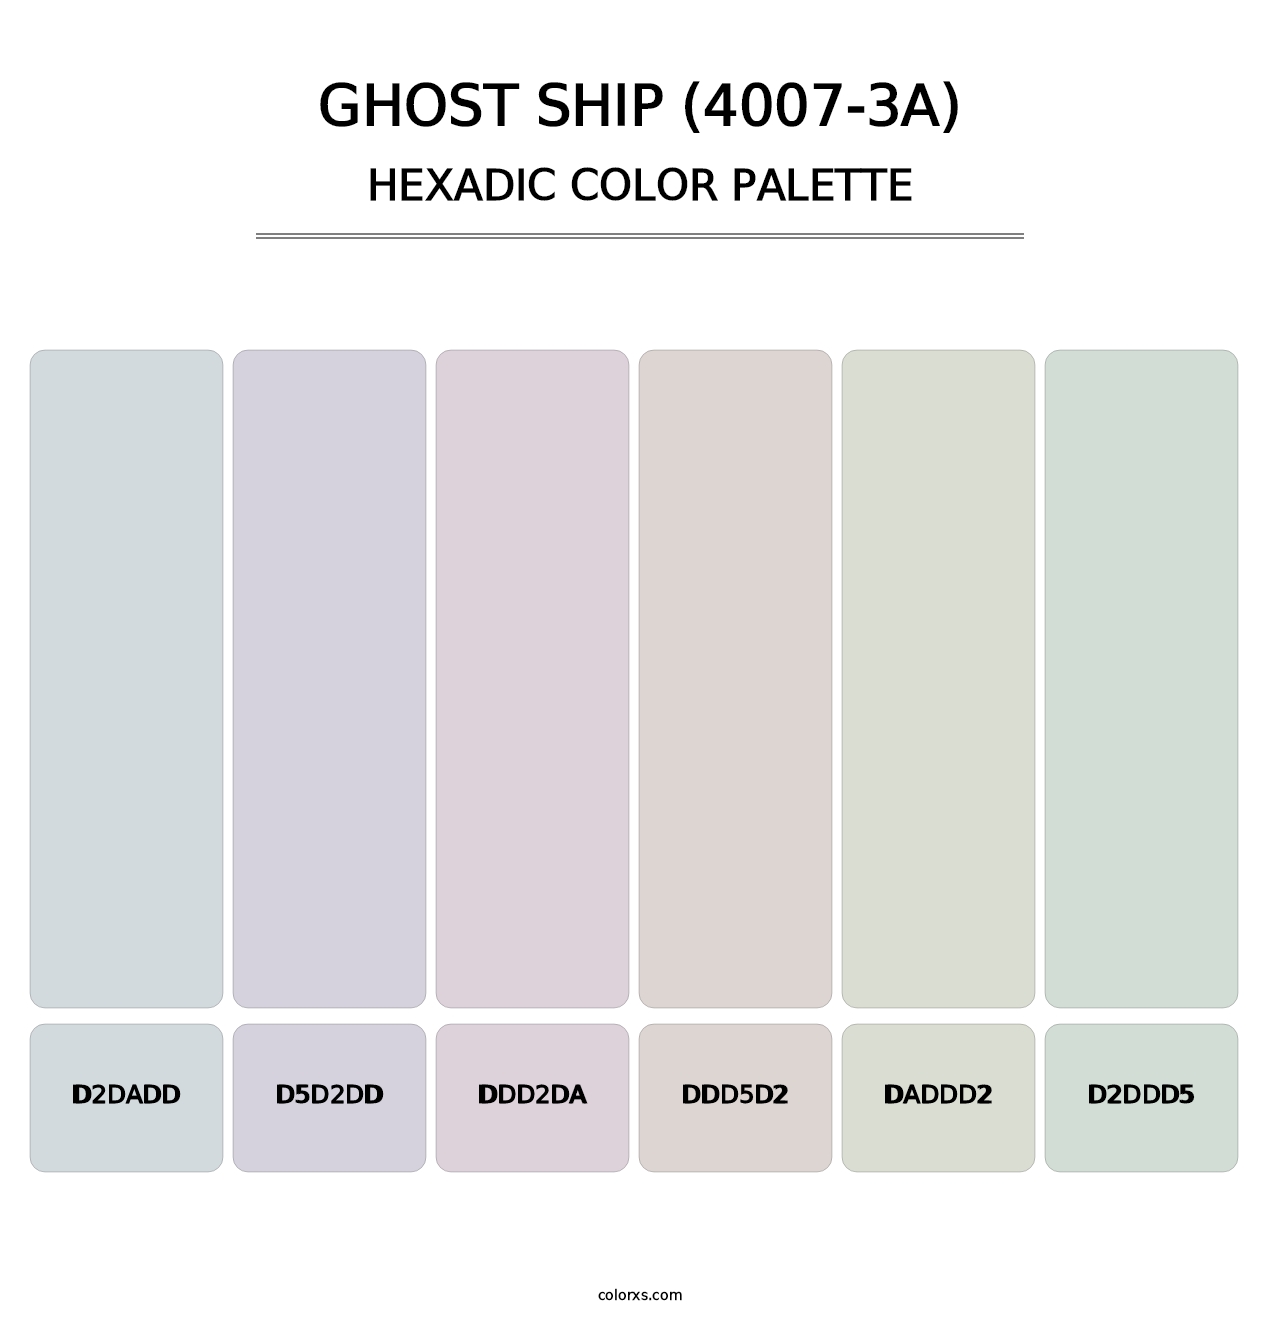 Ghost Ship (4007-3A) - Hexadic Color Palette